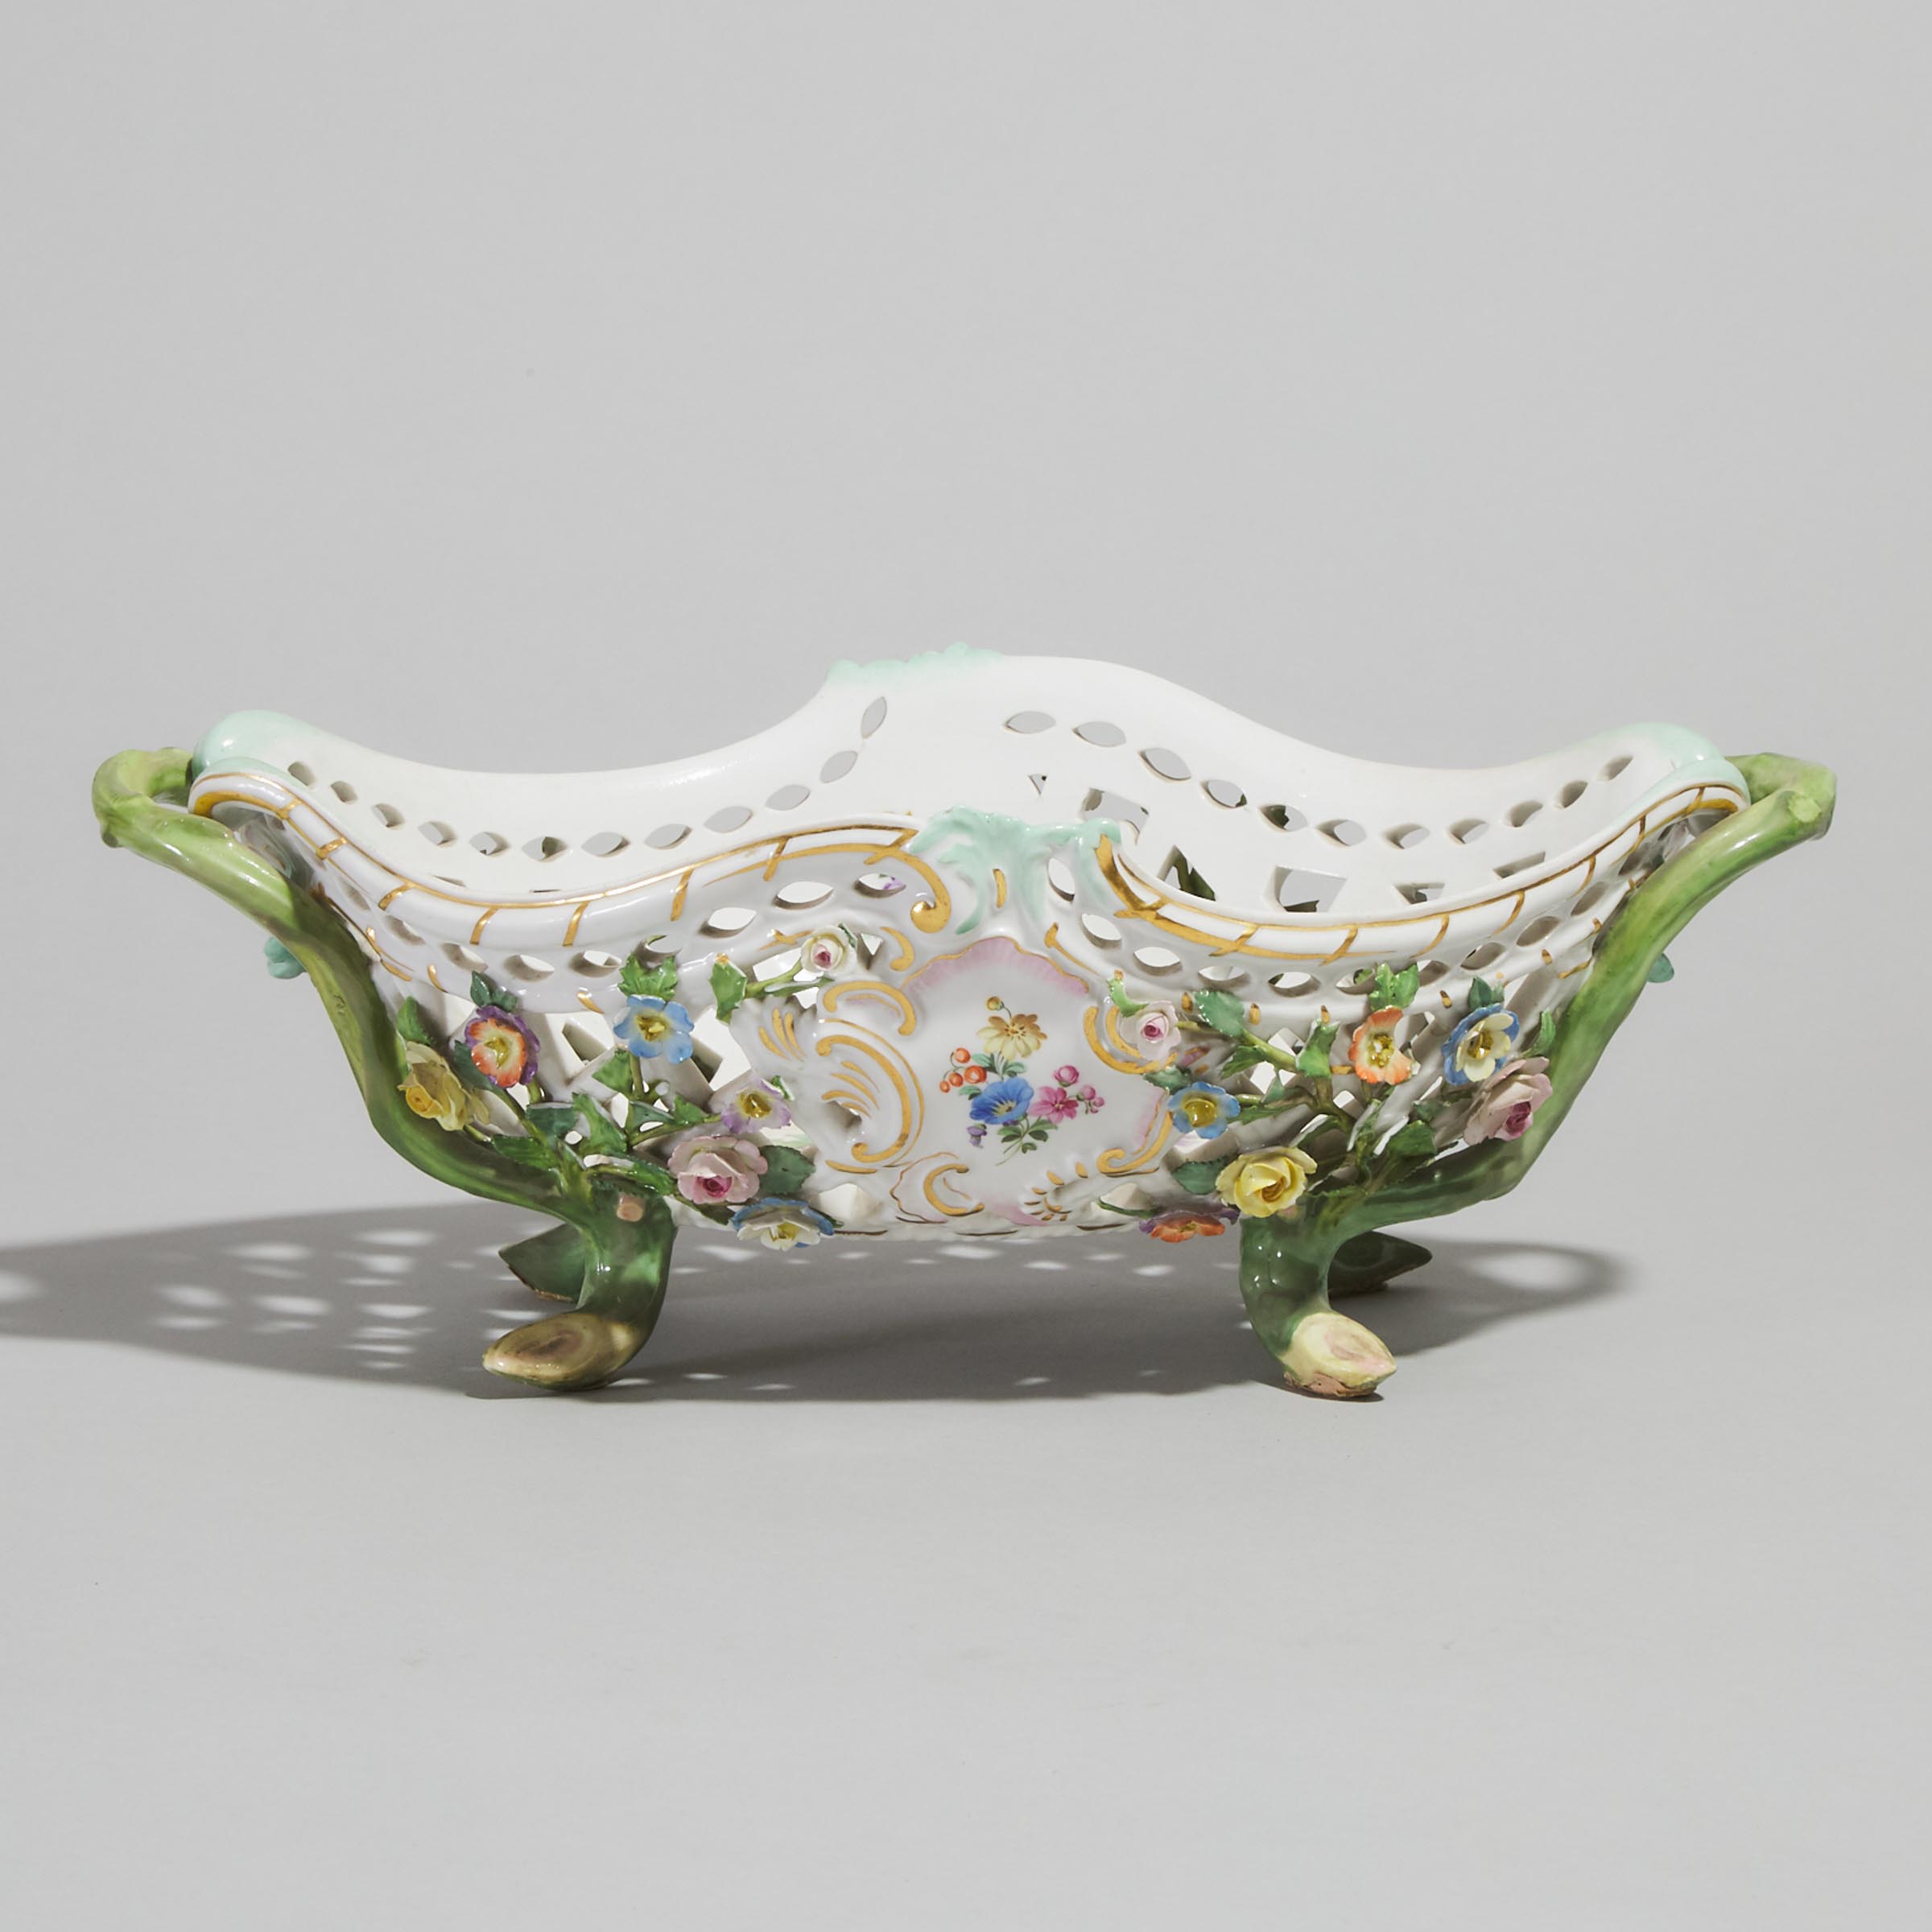 Meissen Flower-Encrusted and Reticulated Oval Two-Handled Basket, late 19th/early 20th century